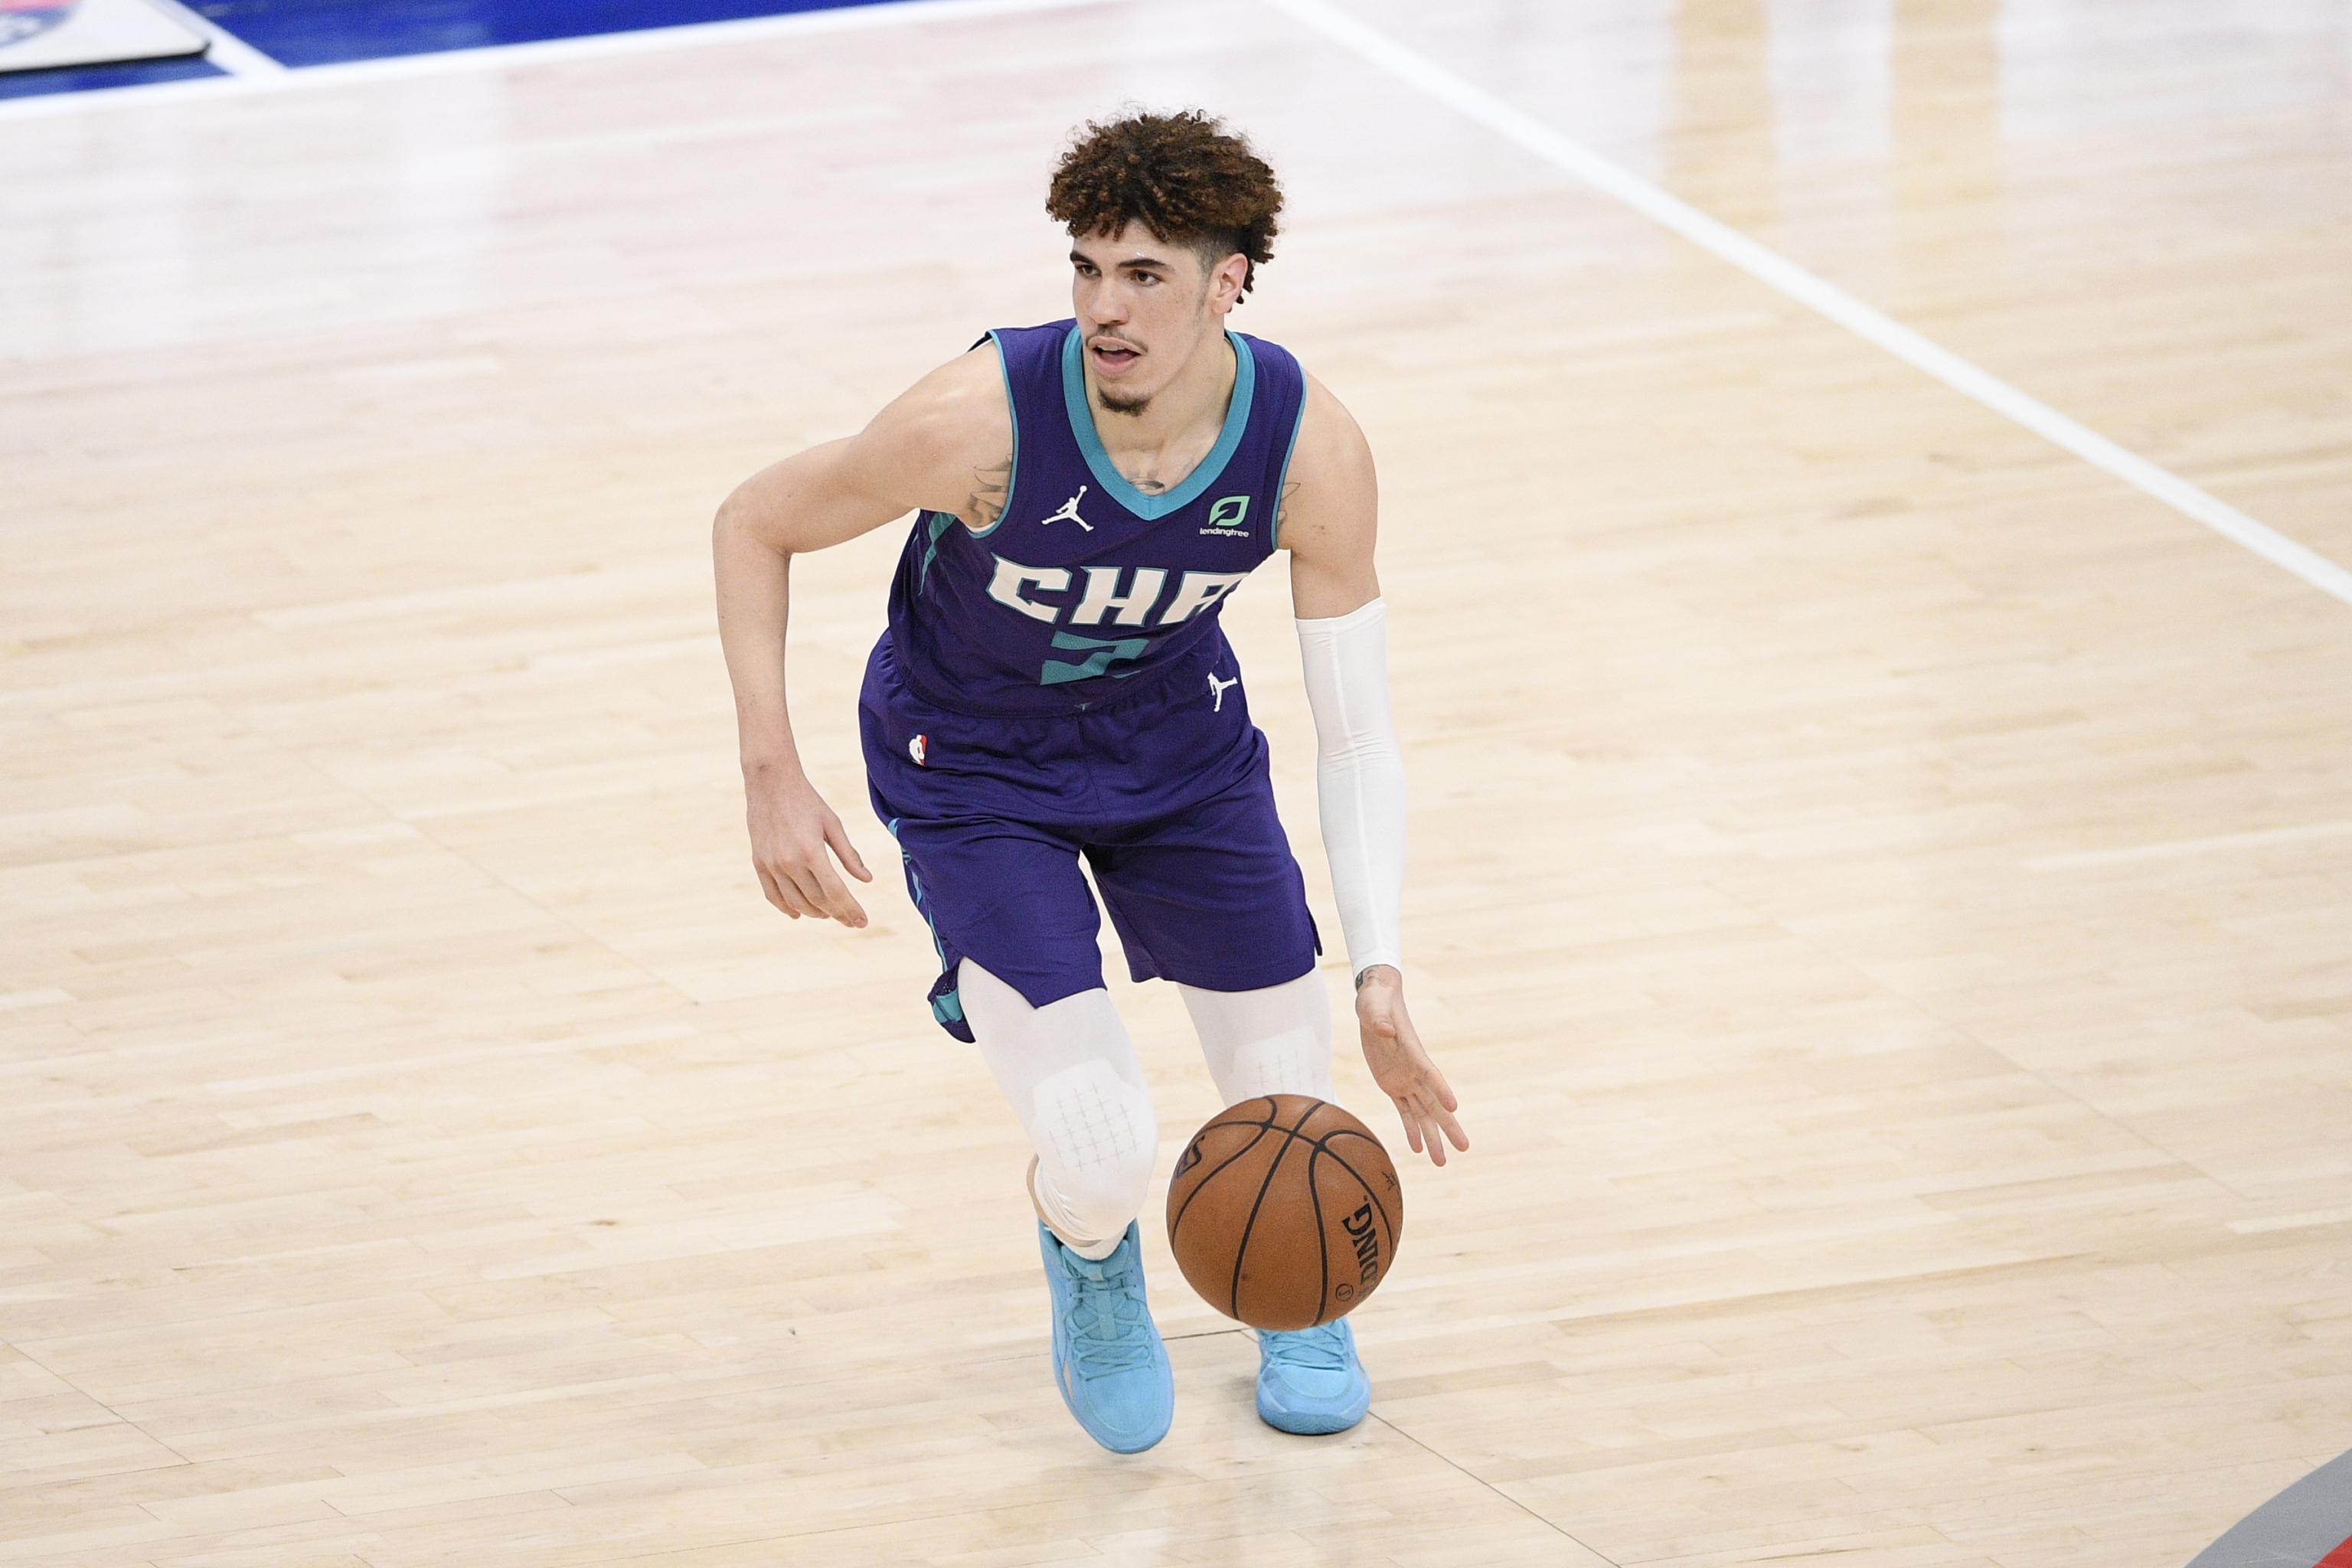 ESPN Australia / NZ - 2021 NBA Rookie of the Year finalists: 👑 Haliburton  🐝 Ball 🐺 Edwards LaMelo Ball led all rookies in assists and steals this  season. He also became